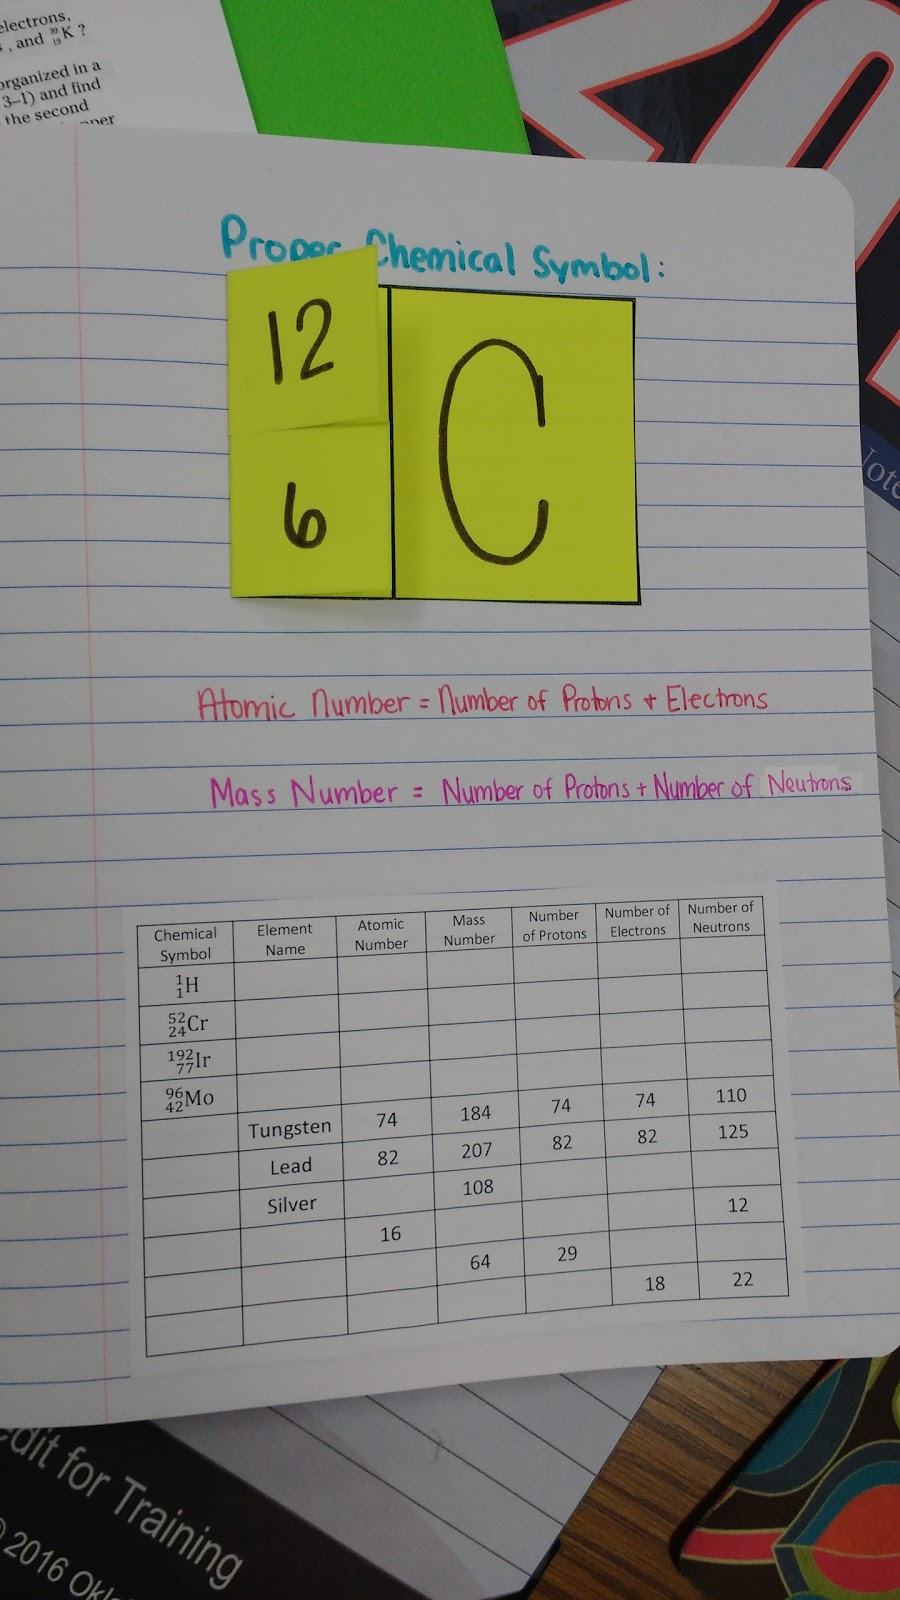 Proper Chemical Symbol Foldable for Interactive Notebook in Physical Science or Chemistry